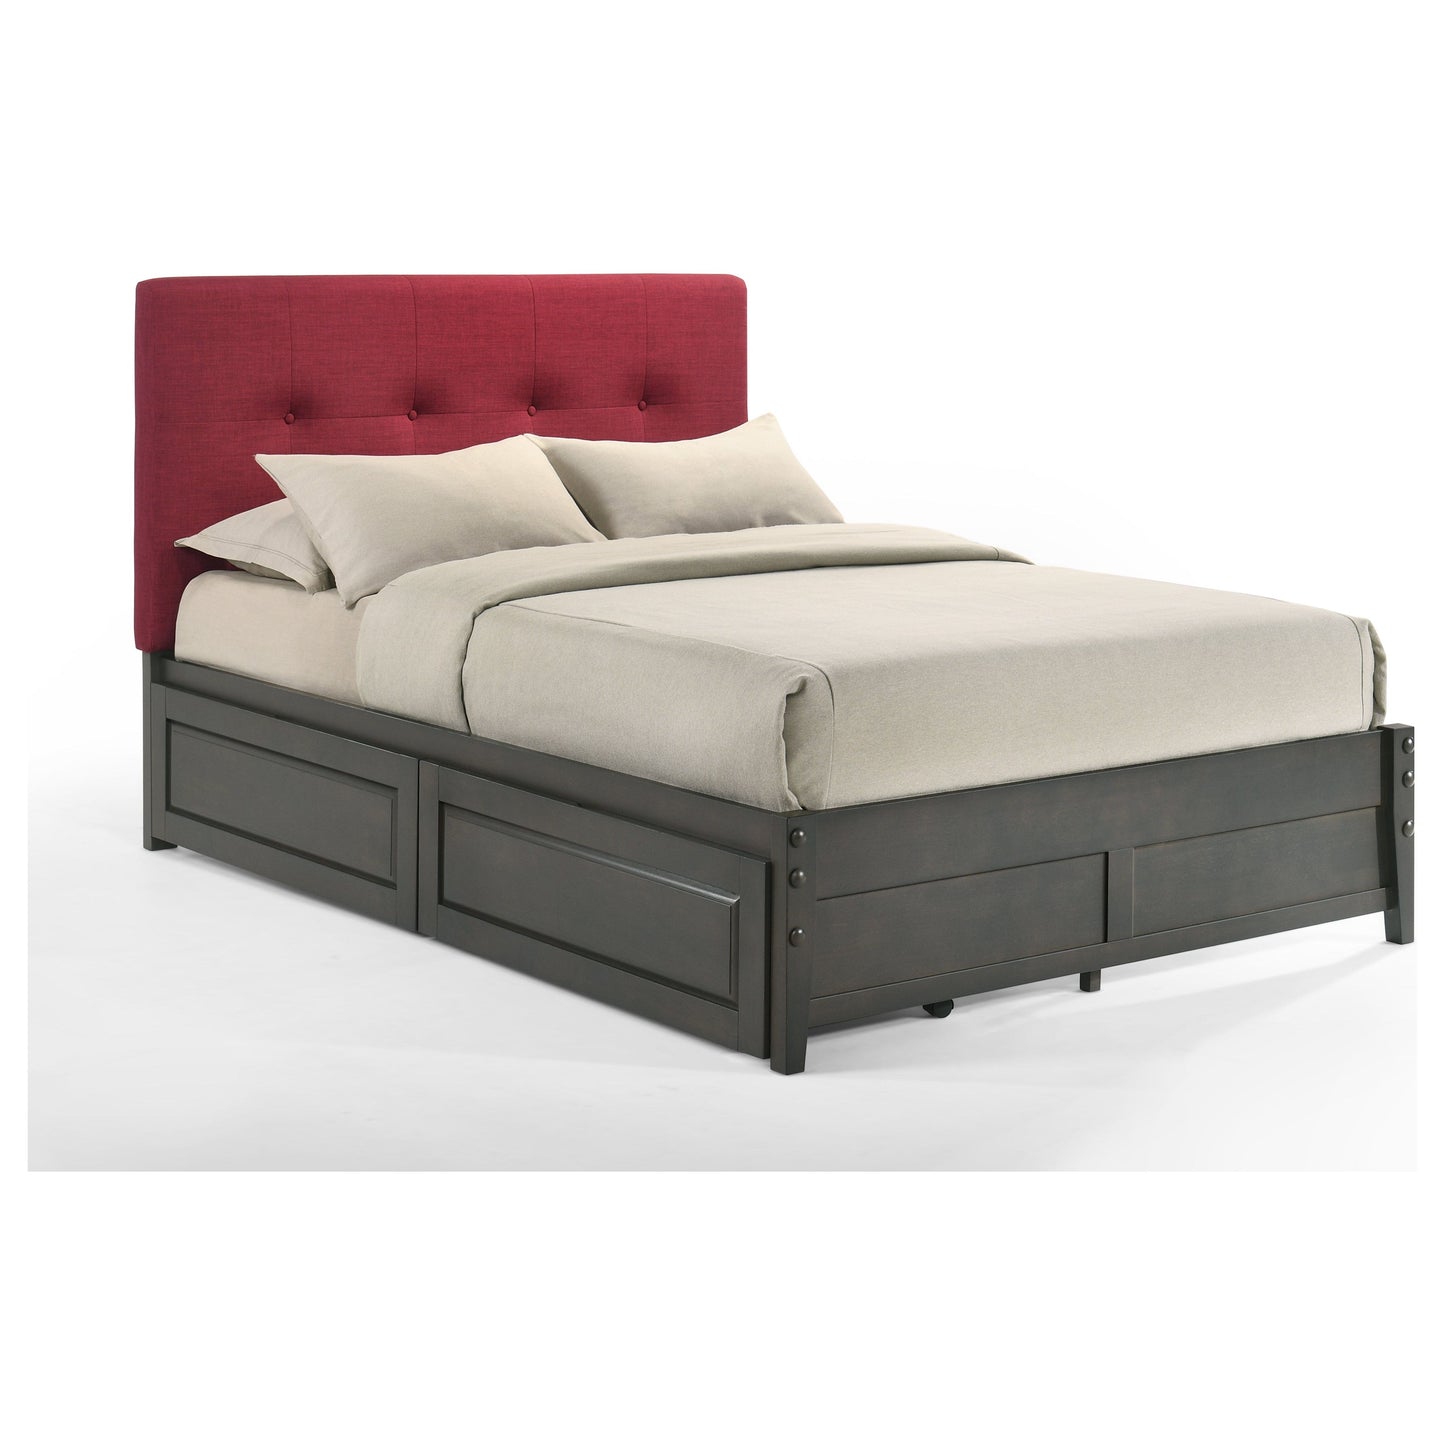 The Bedroom Emporium Paprika Twin Bed in Charcoal with Stonewash Finish Frame (K Series) PAP-PH-TWN-CC-COM-K-STW